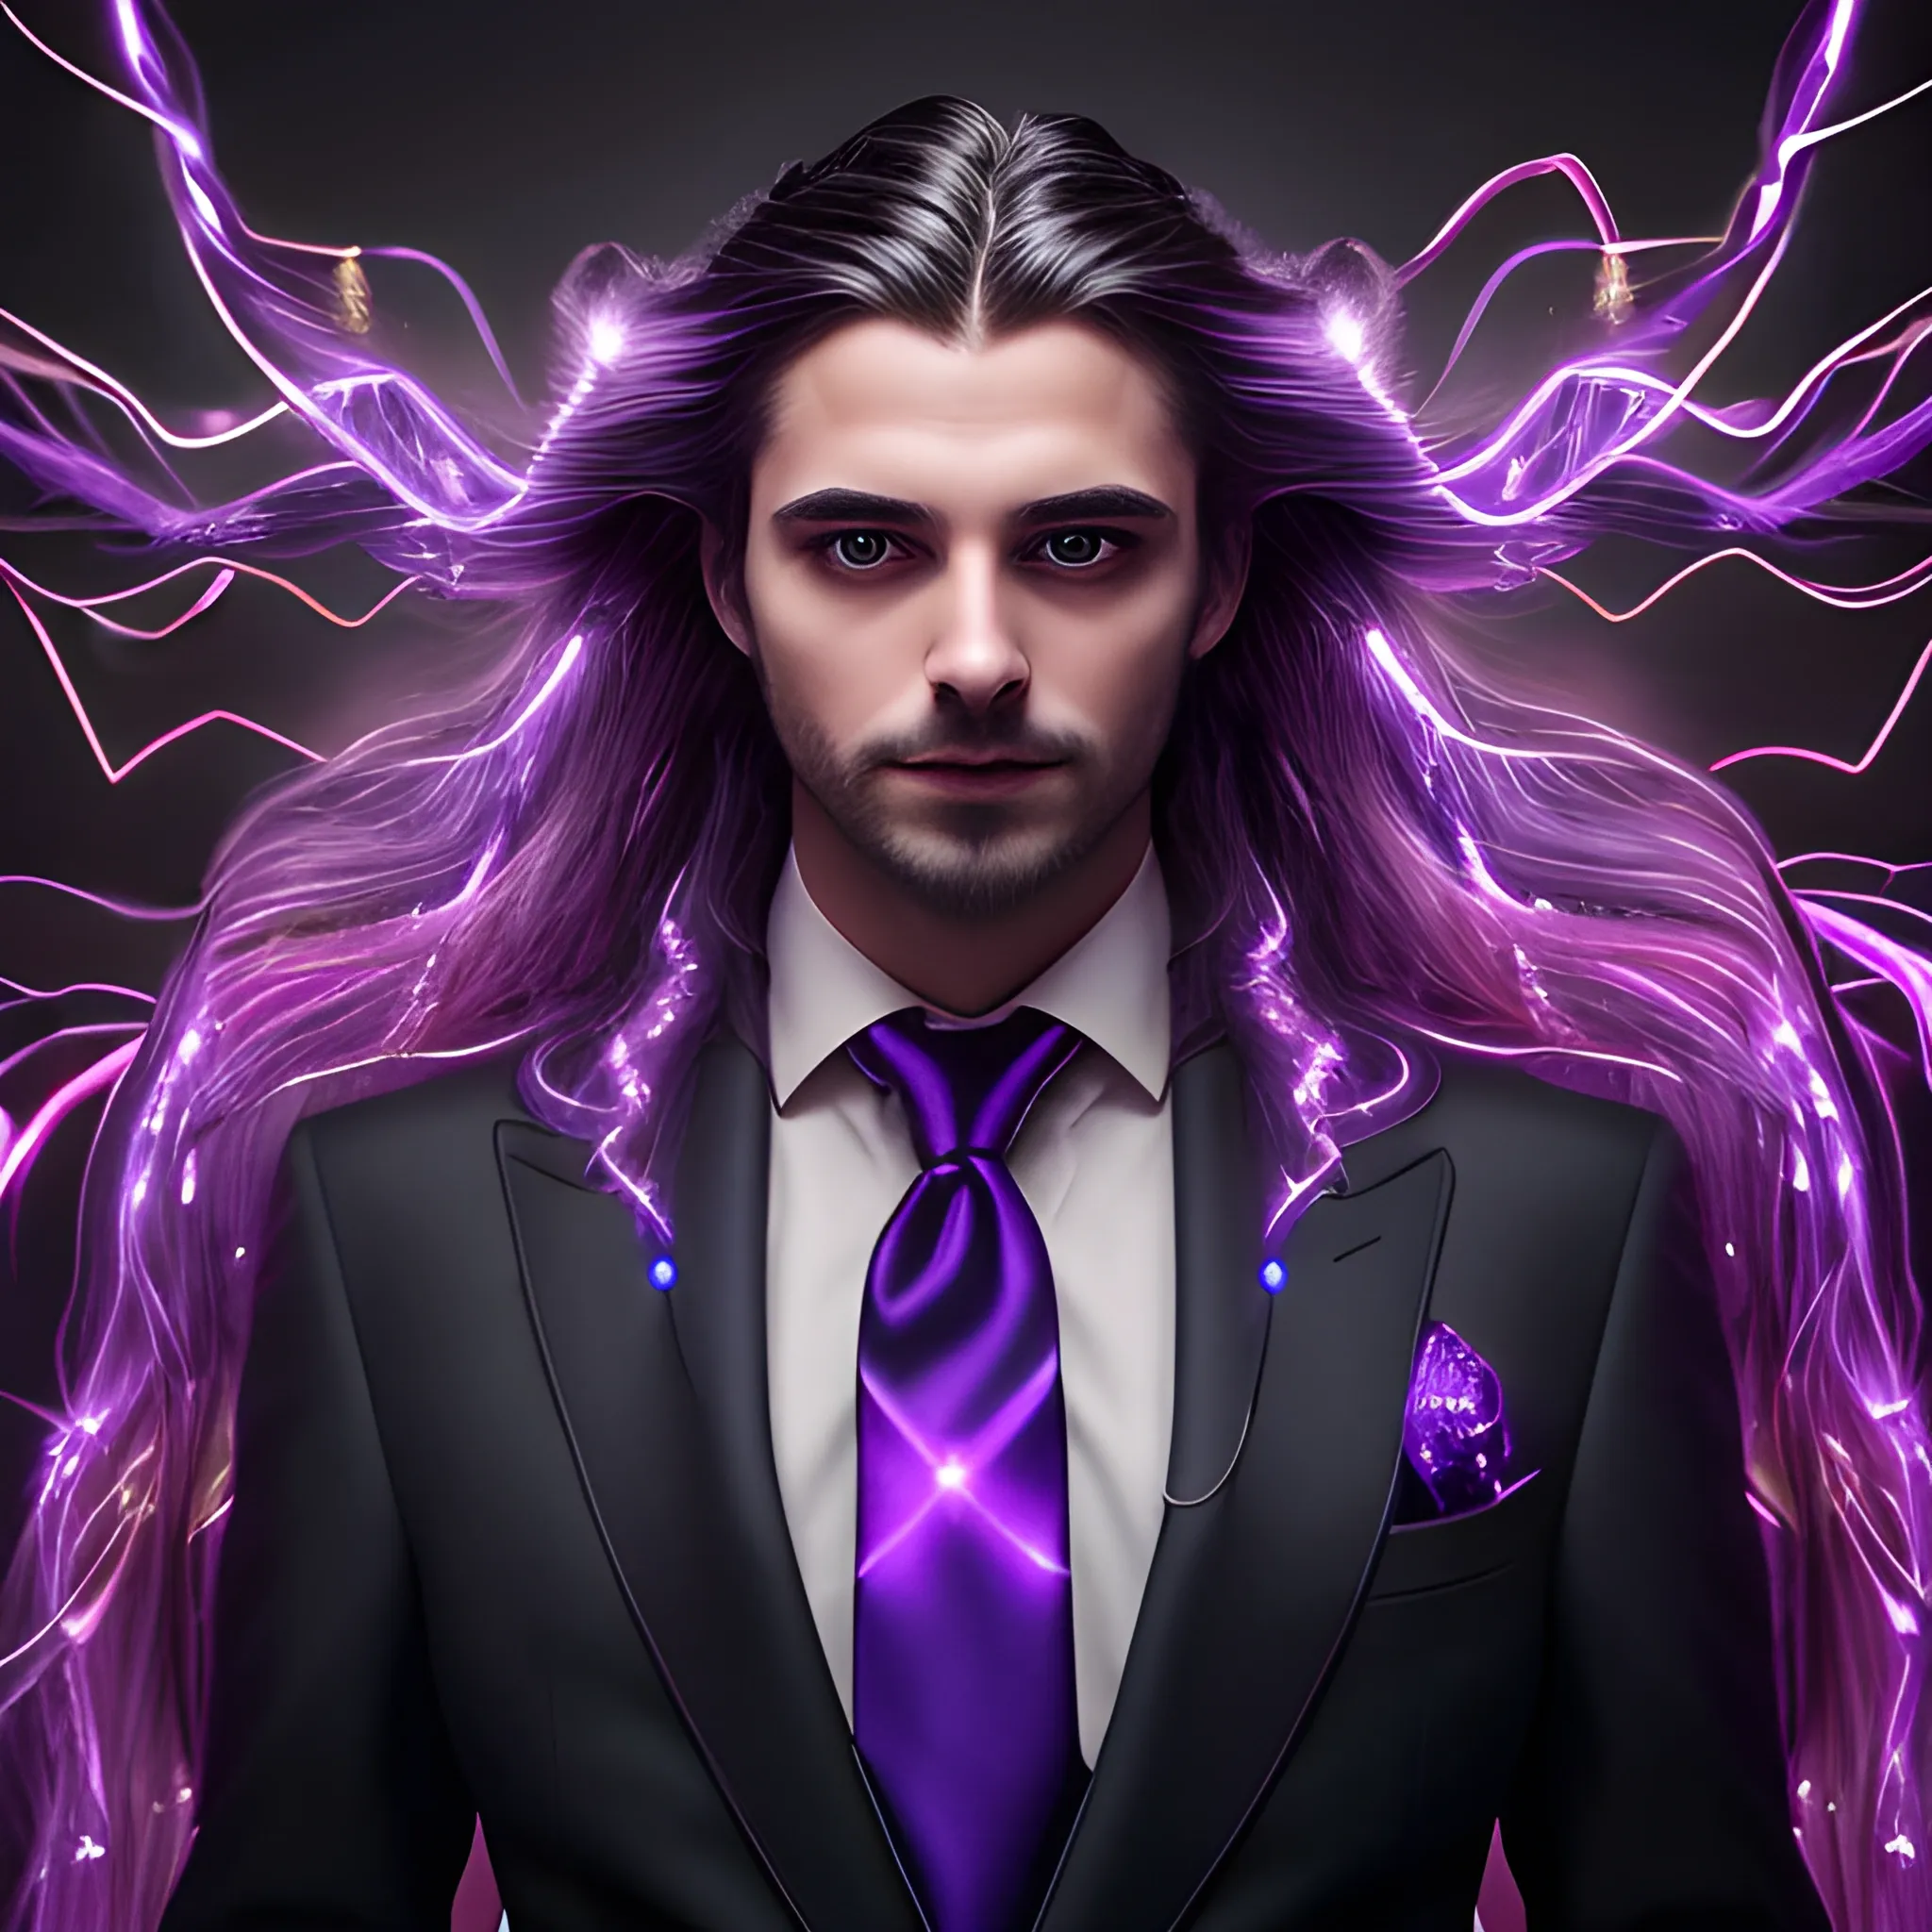 a portait of a man, glowing details, long hair, elegant, dark background, vibrant details, suit, glowing tie, purple dominate, cable electric wires, black feathers, vibrant details, fantasy, energy